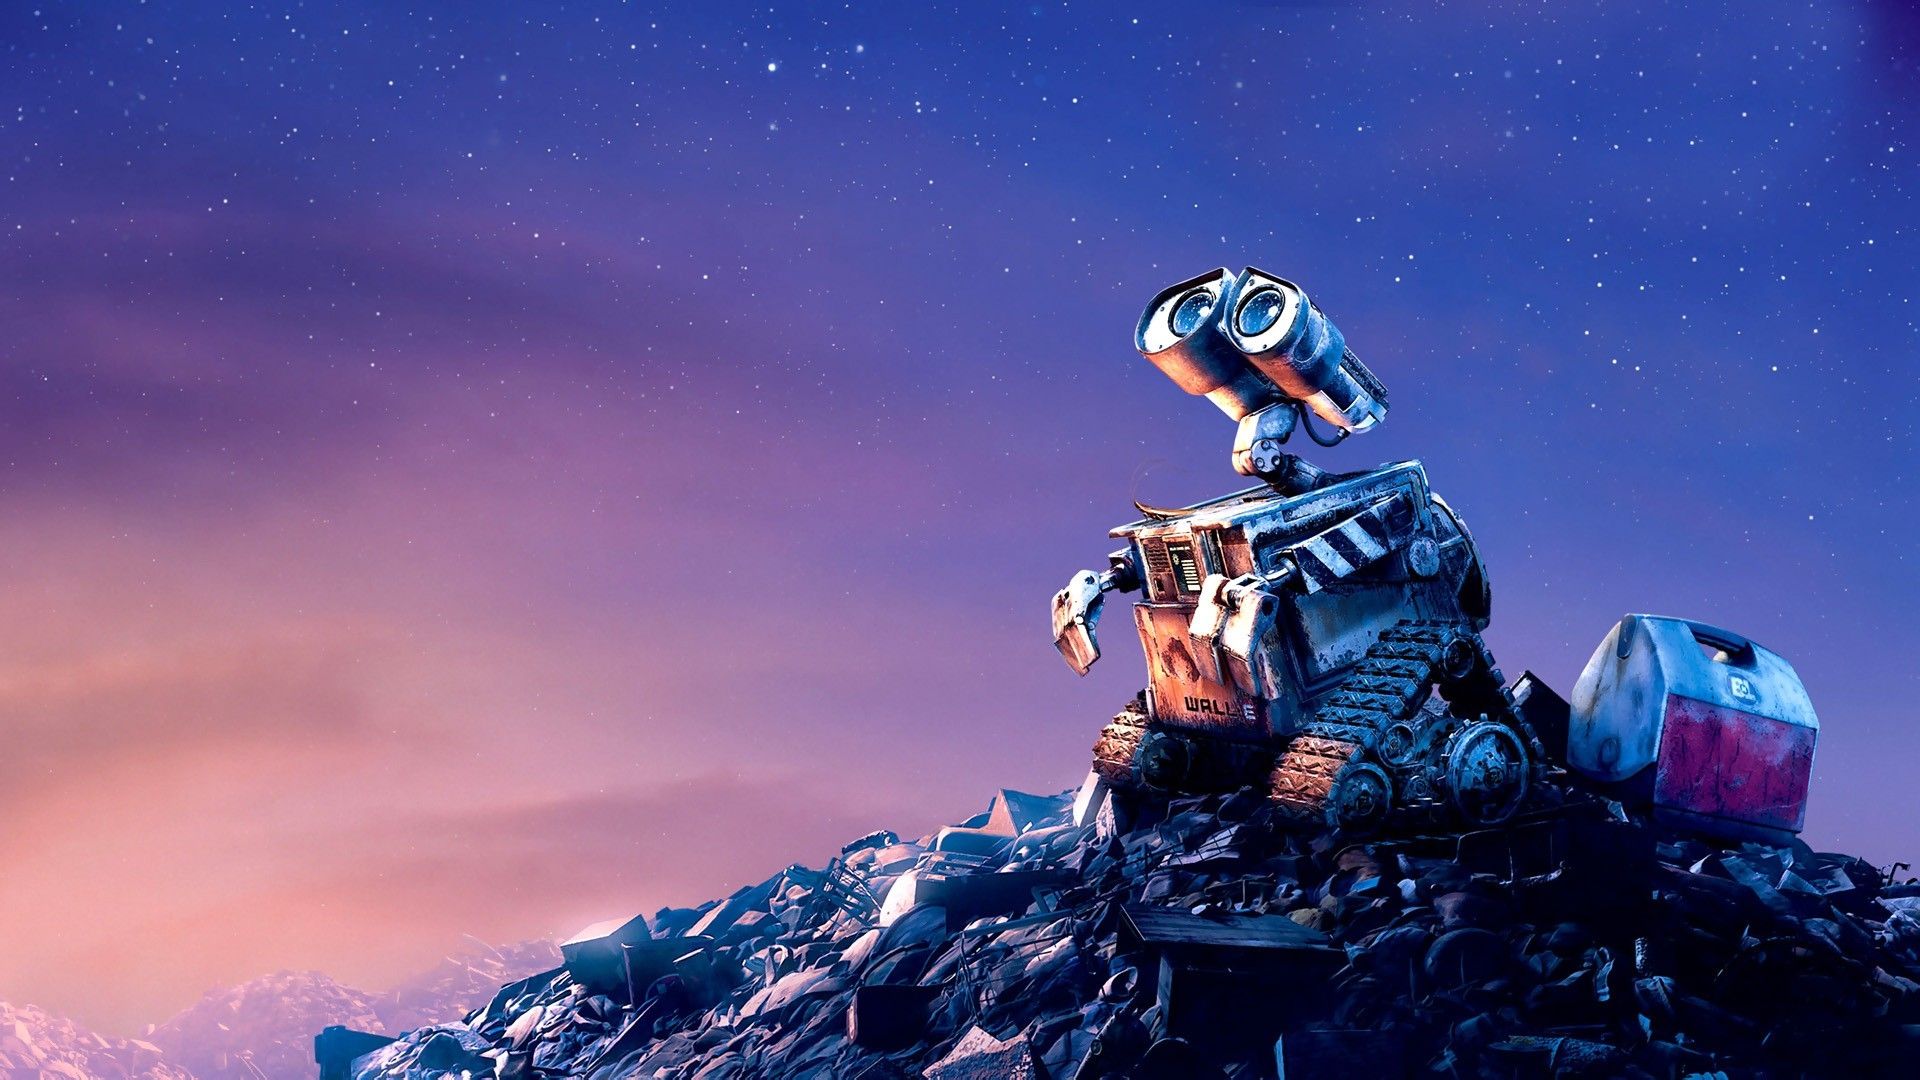 Download 1920x1080 Wall E, Animation, Robot, Stars, Sad Expression Wallpaper For Widescreen